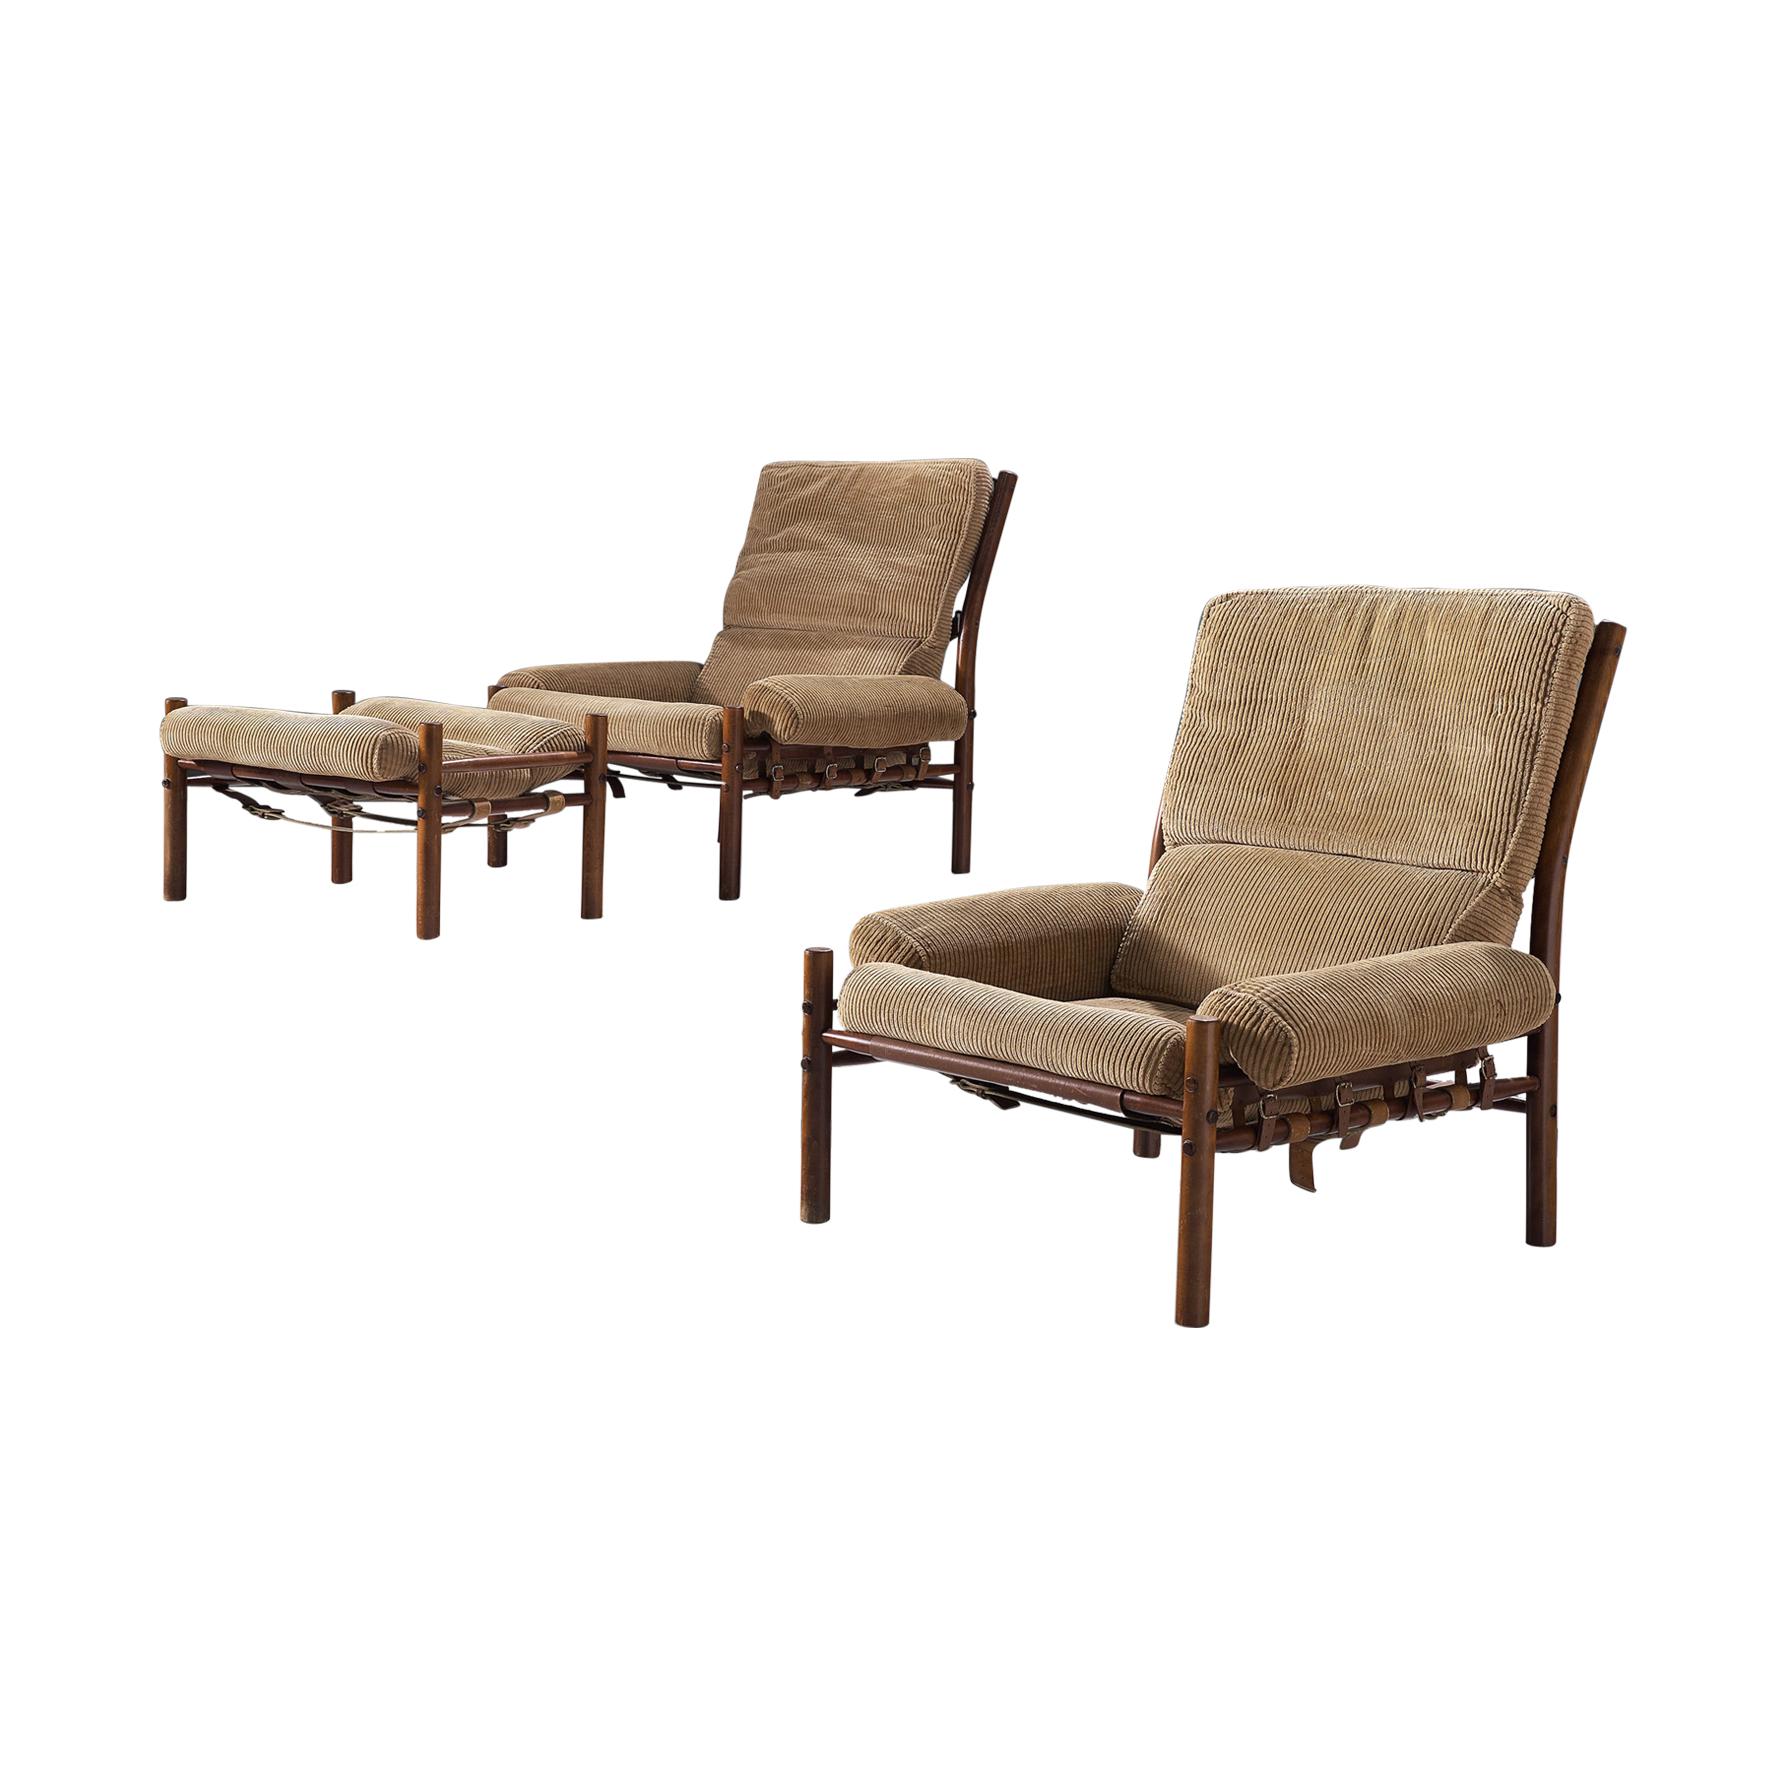 Pair Of Lounge Chairs With Ottoman In Black Leather By Percival